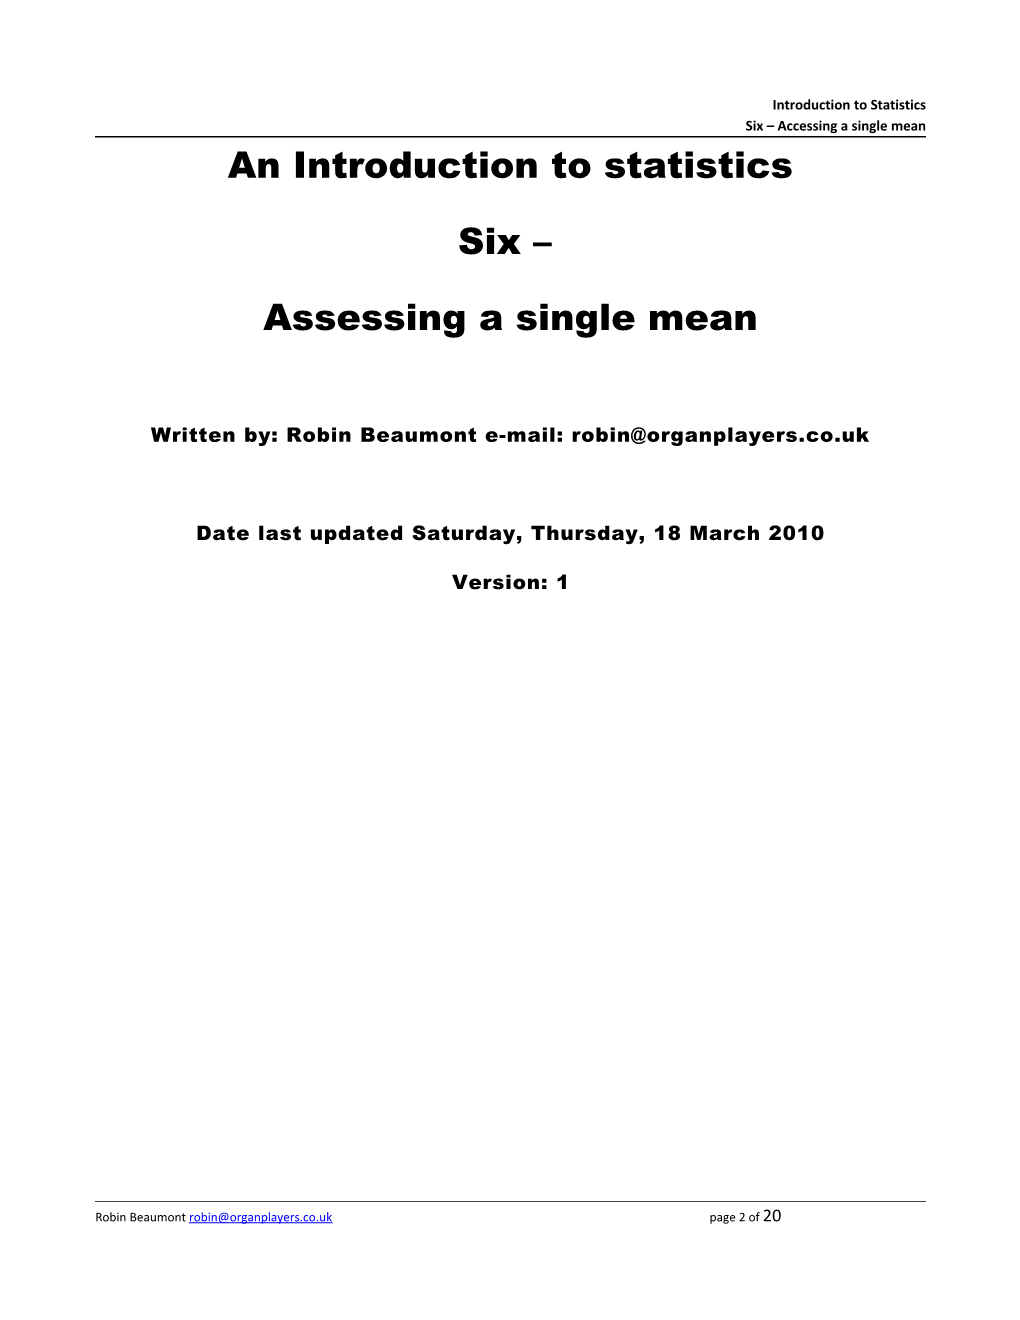 Introduction to Statistics Six Accessing a Single Mean